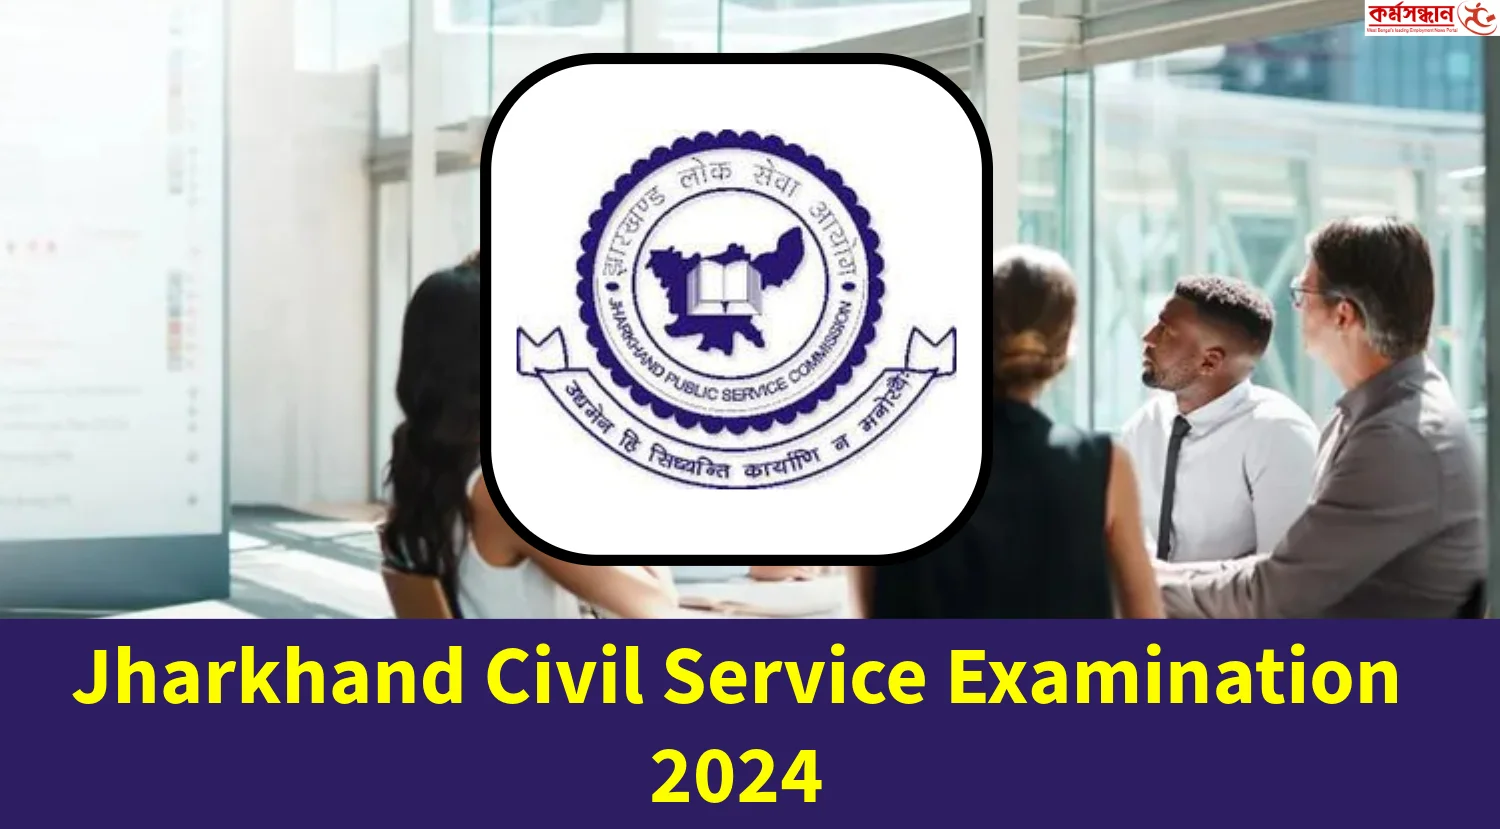 JPSC Pre Notification Out 2024, Check Jharkhand Civil Service Examination Eligibility Criteria and How to Apply